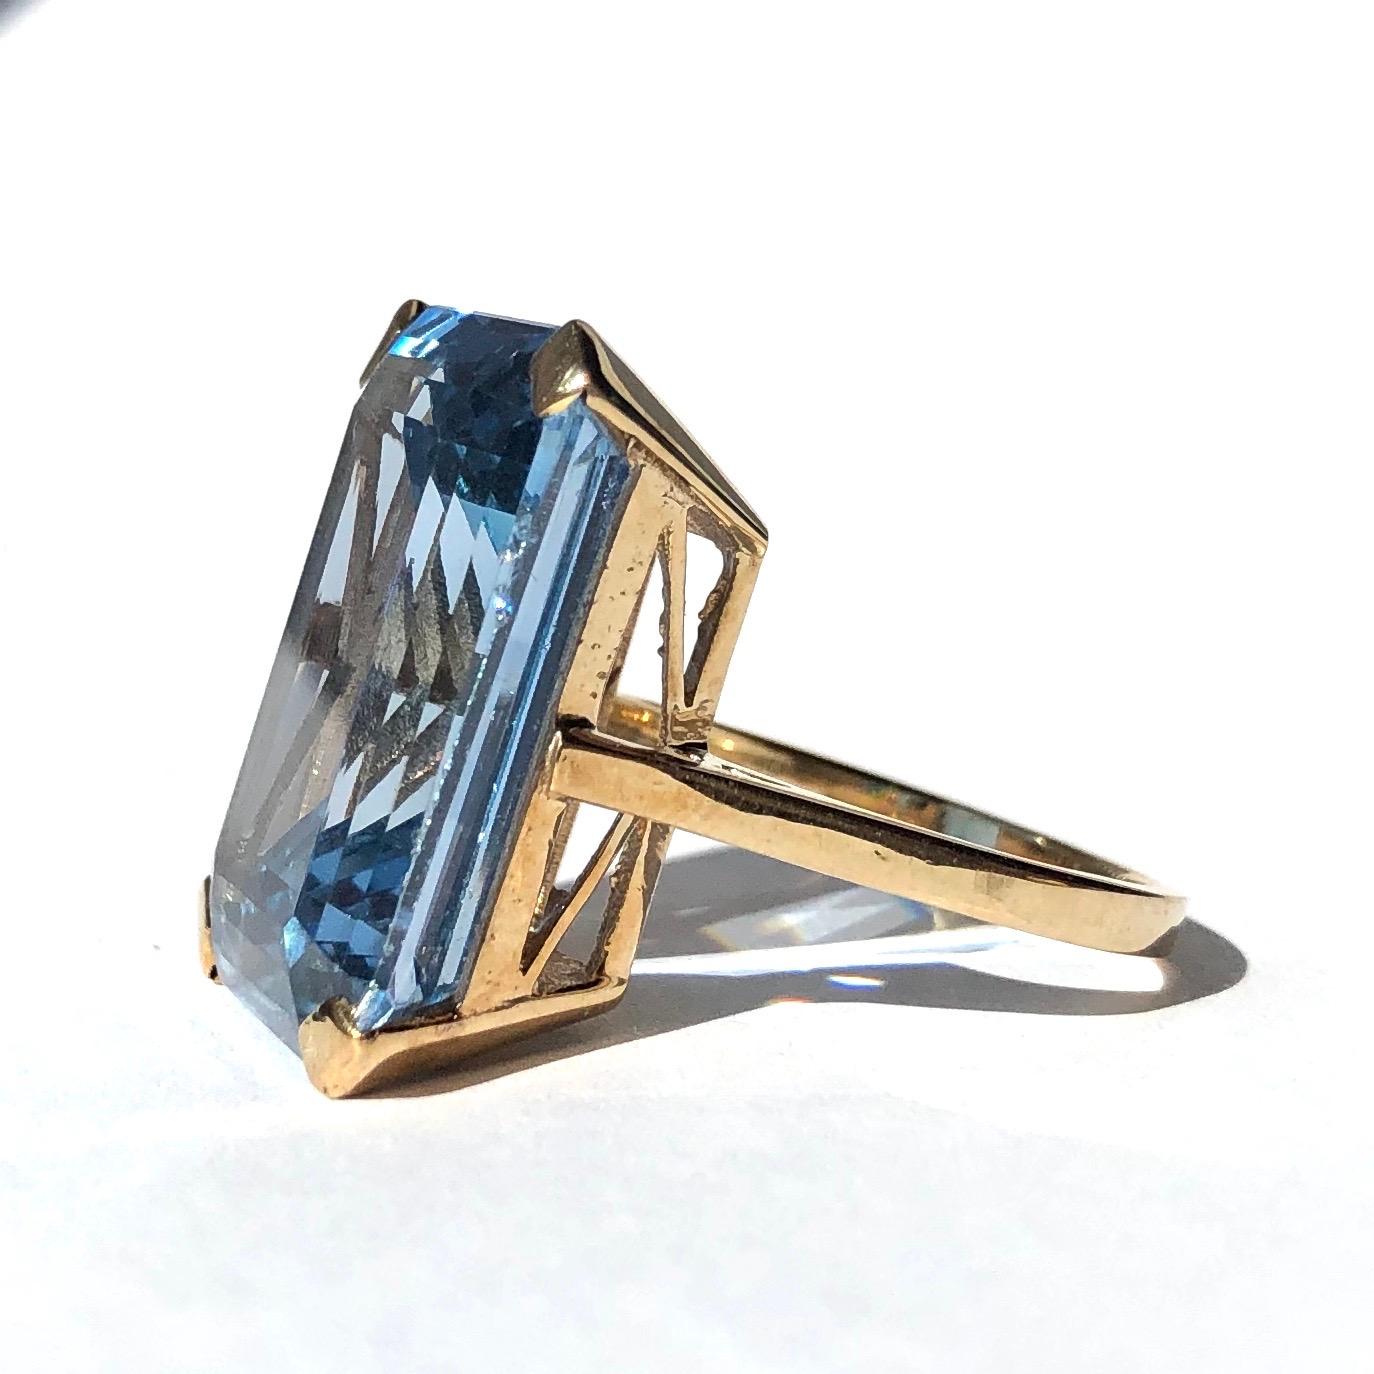 This ring is a sure show stopper! The colour of the blue spinel measures approximately 20ct and is so striking and the cut really shows this off and created almost a hall of mirrors effect! The stone is set in a simple claw setting and the ring is